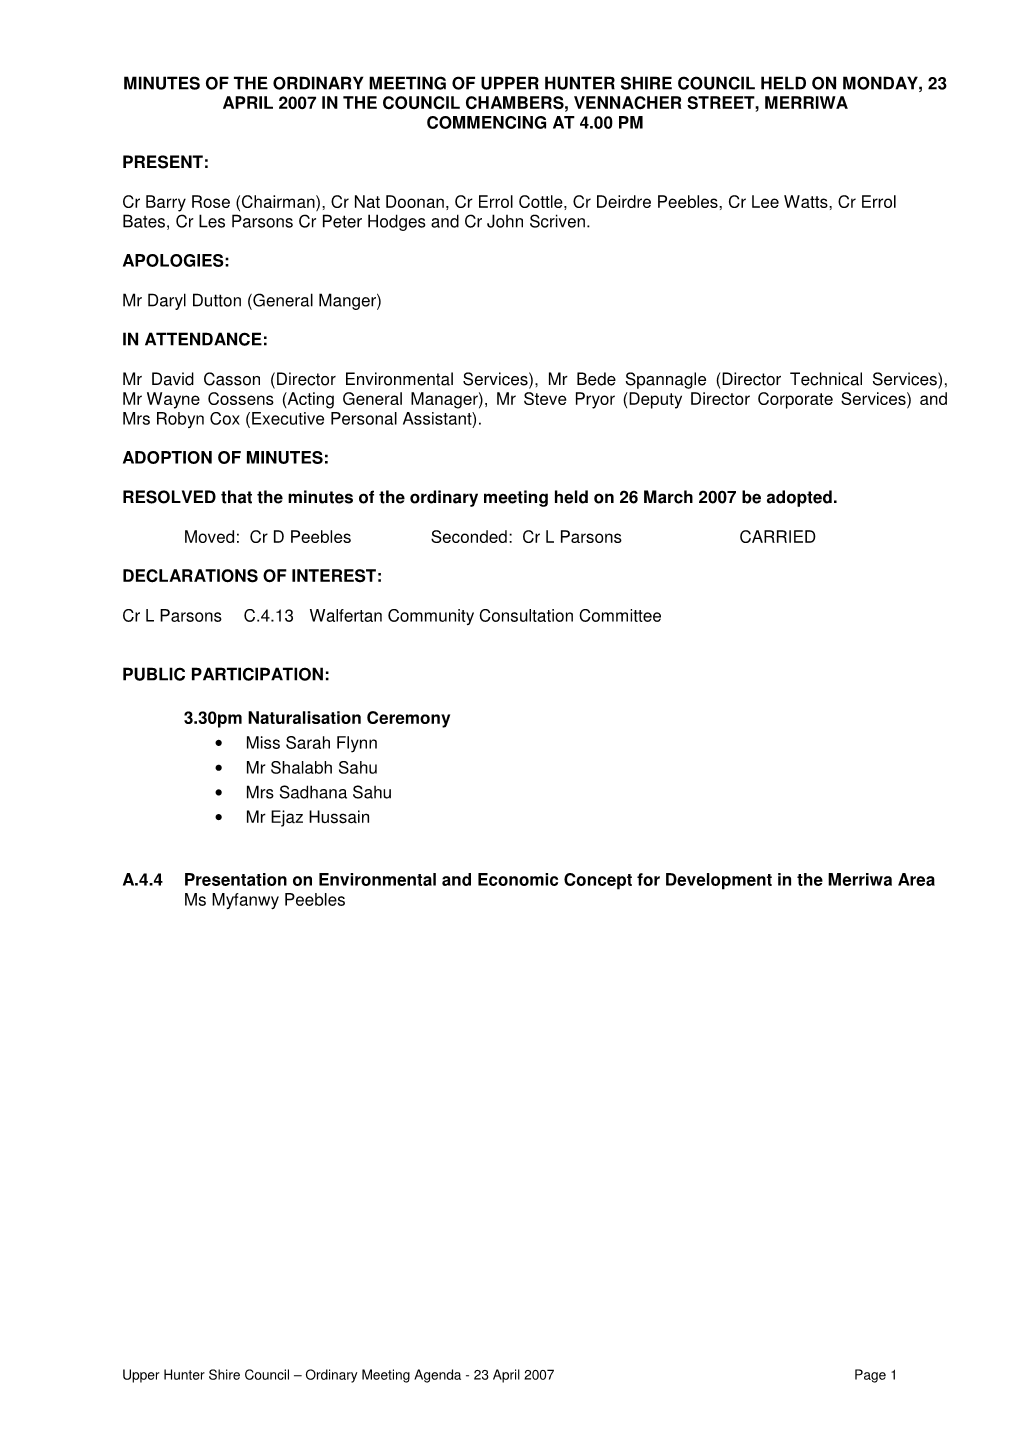 Minutes of the Ordinary Meeting of Upper Hunter Shire Council Held on Monday, 23 April 2007 in the Council Chambers, Vennacher Street, Merriwa Commencing at 4.00 Pm